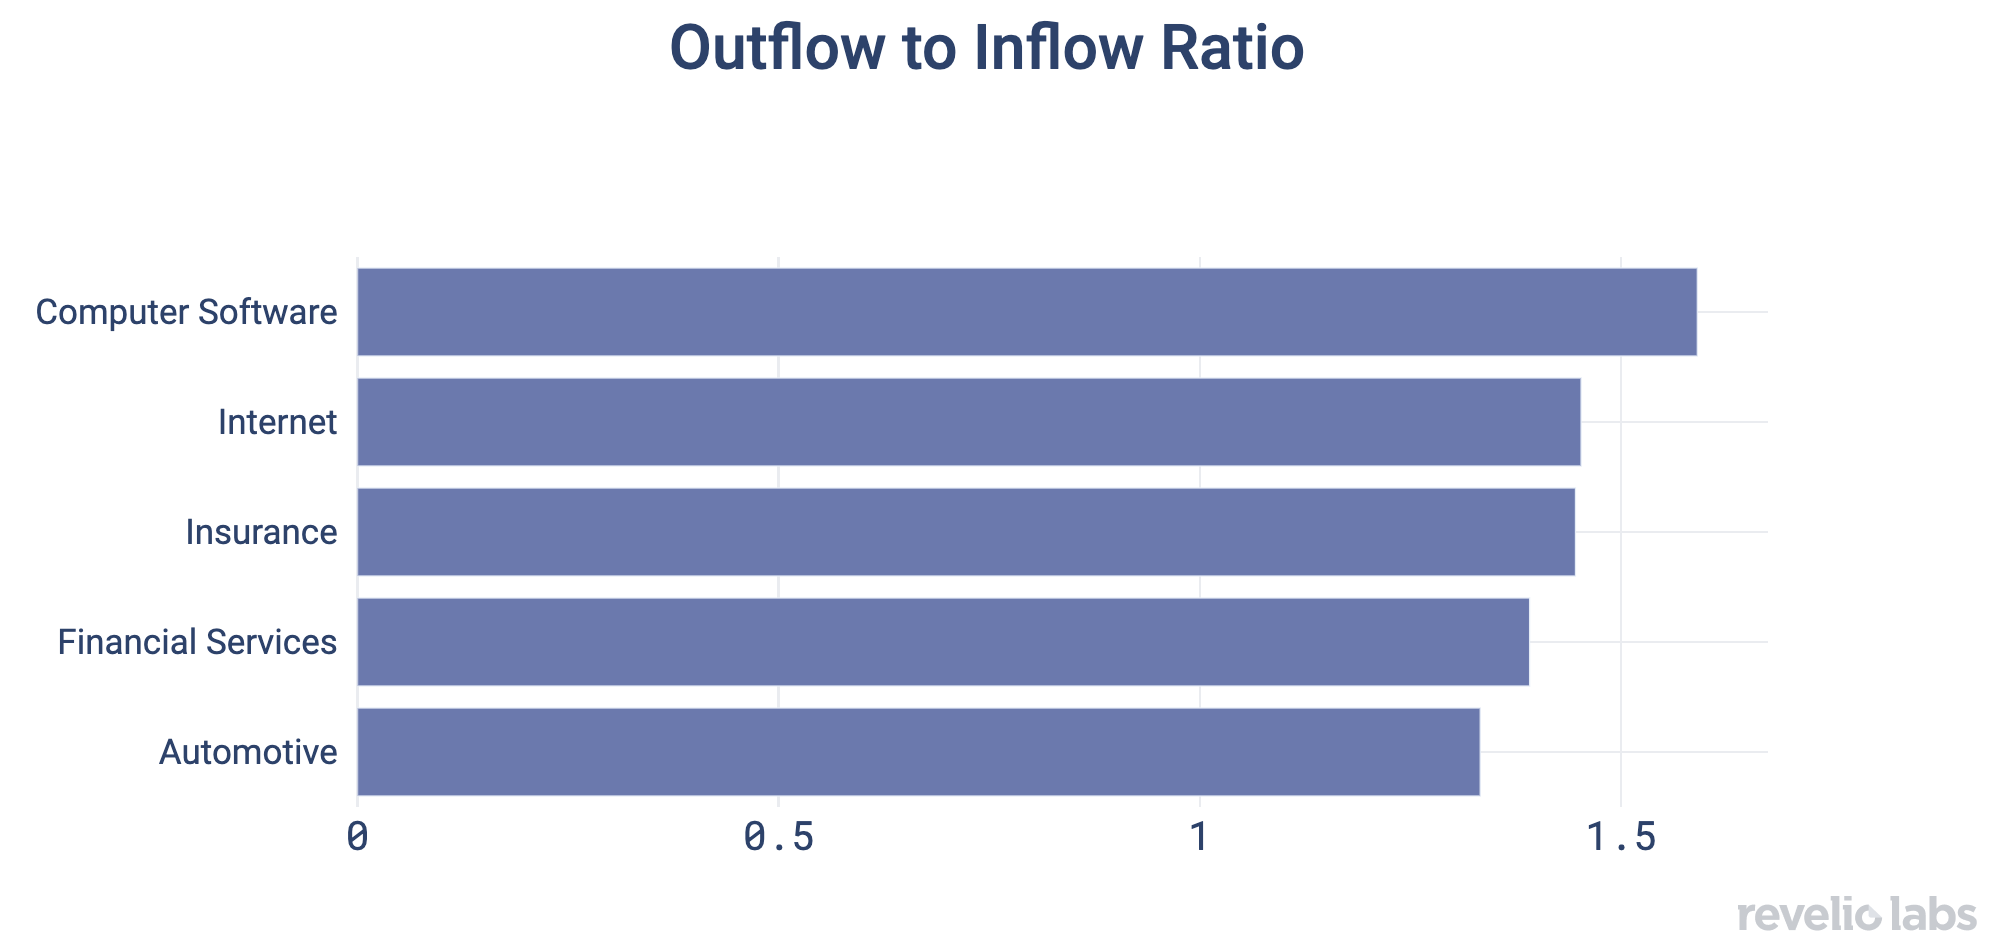 Outflow to Inflow Ratio